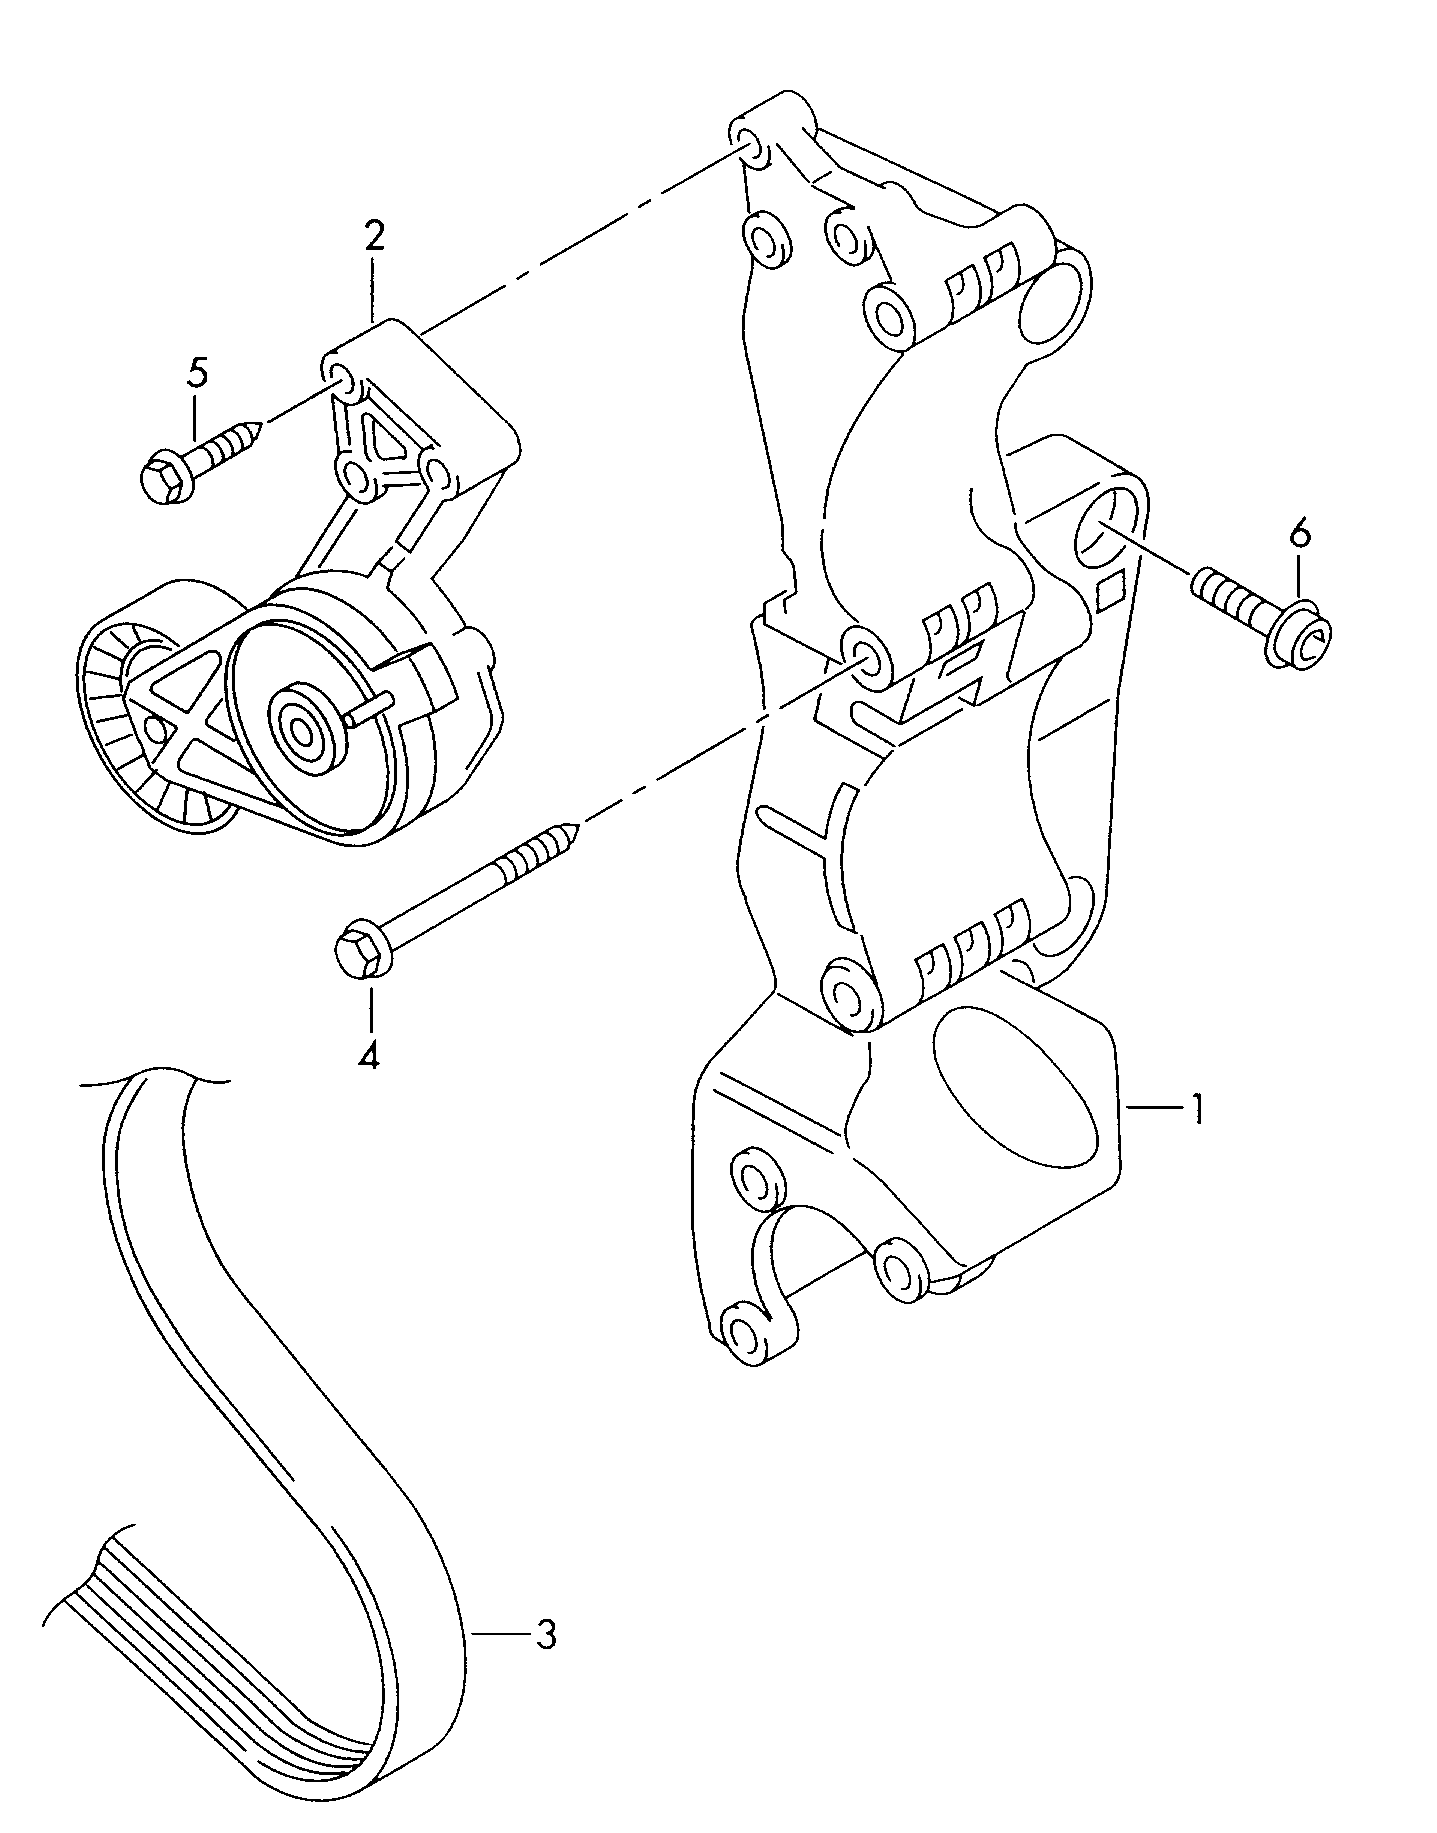 connecting and mounting parts<br>for alternatorPoly-V-belt 2.0 Ltr. - Fabia - fab